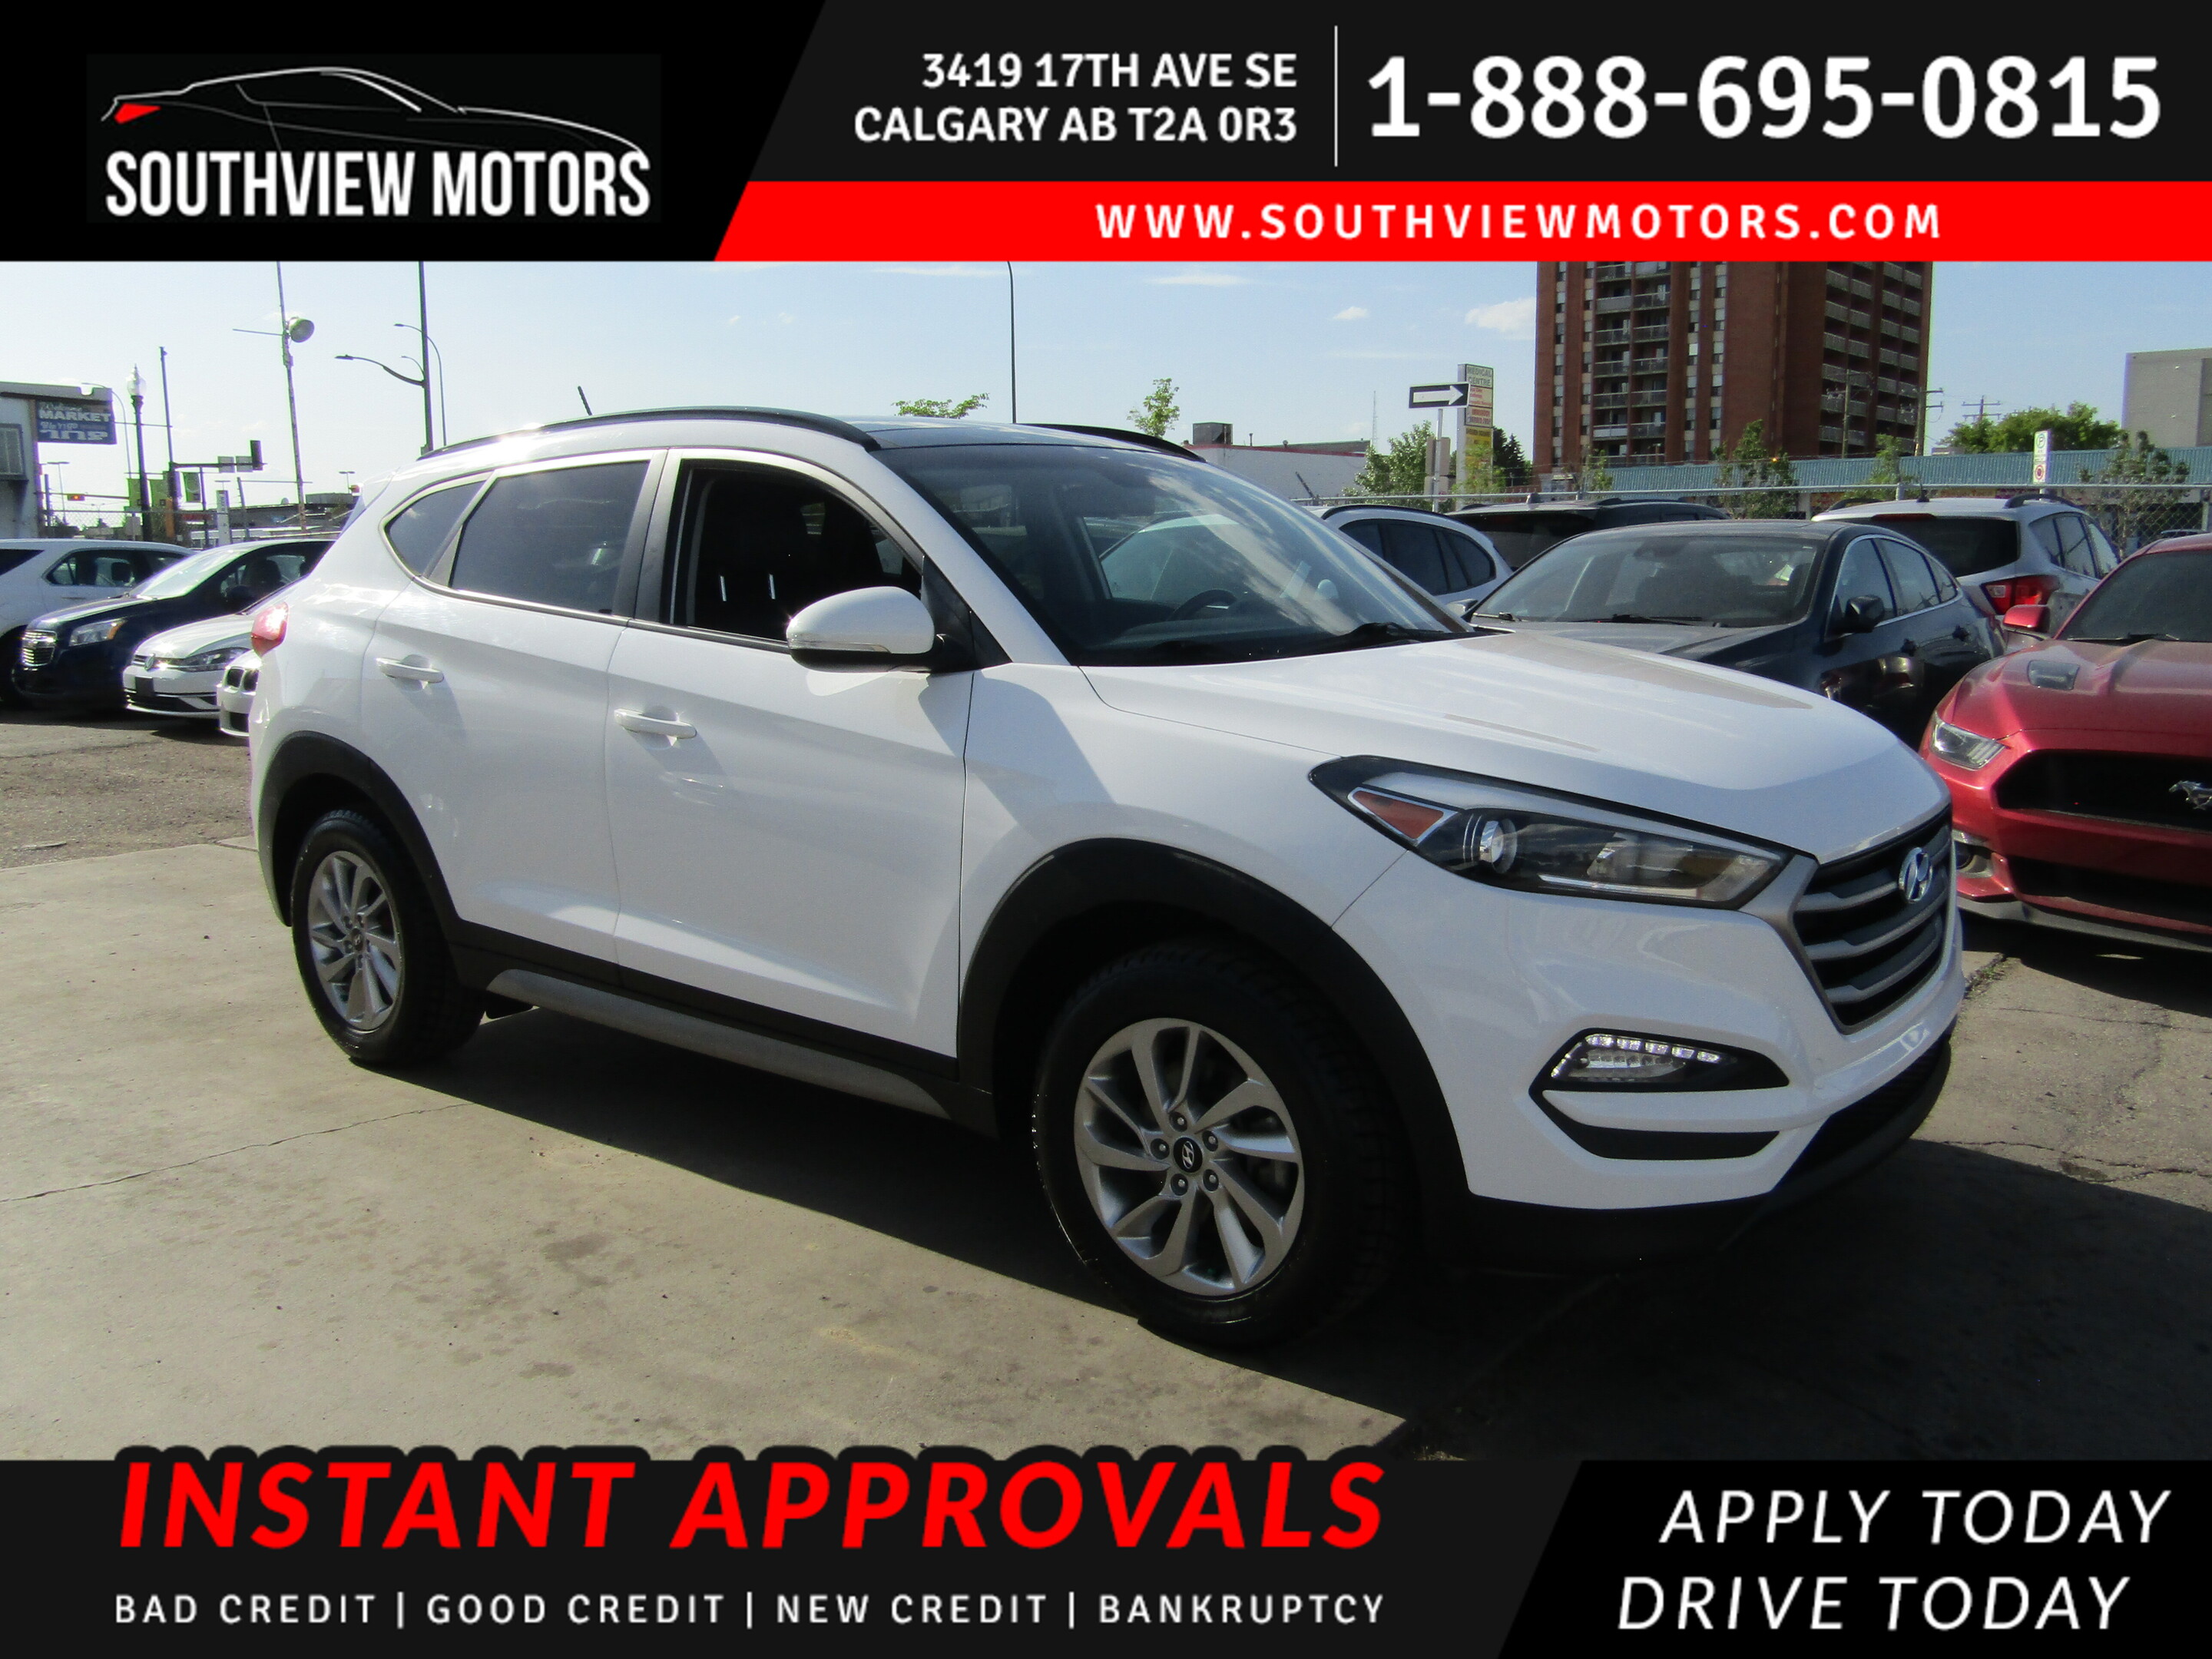 2017 Hyundai Tucson LIMITED AWD B.S.A/CAM/LEATHER/PANO ROOF/FULL LOAD!